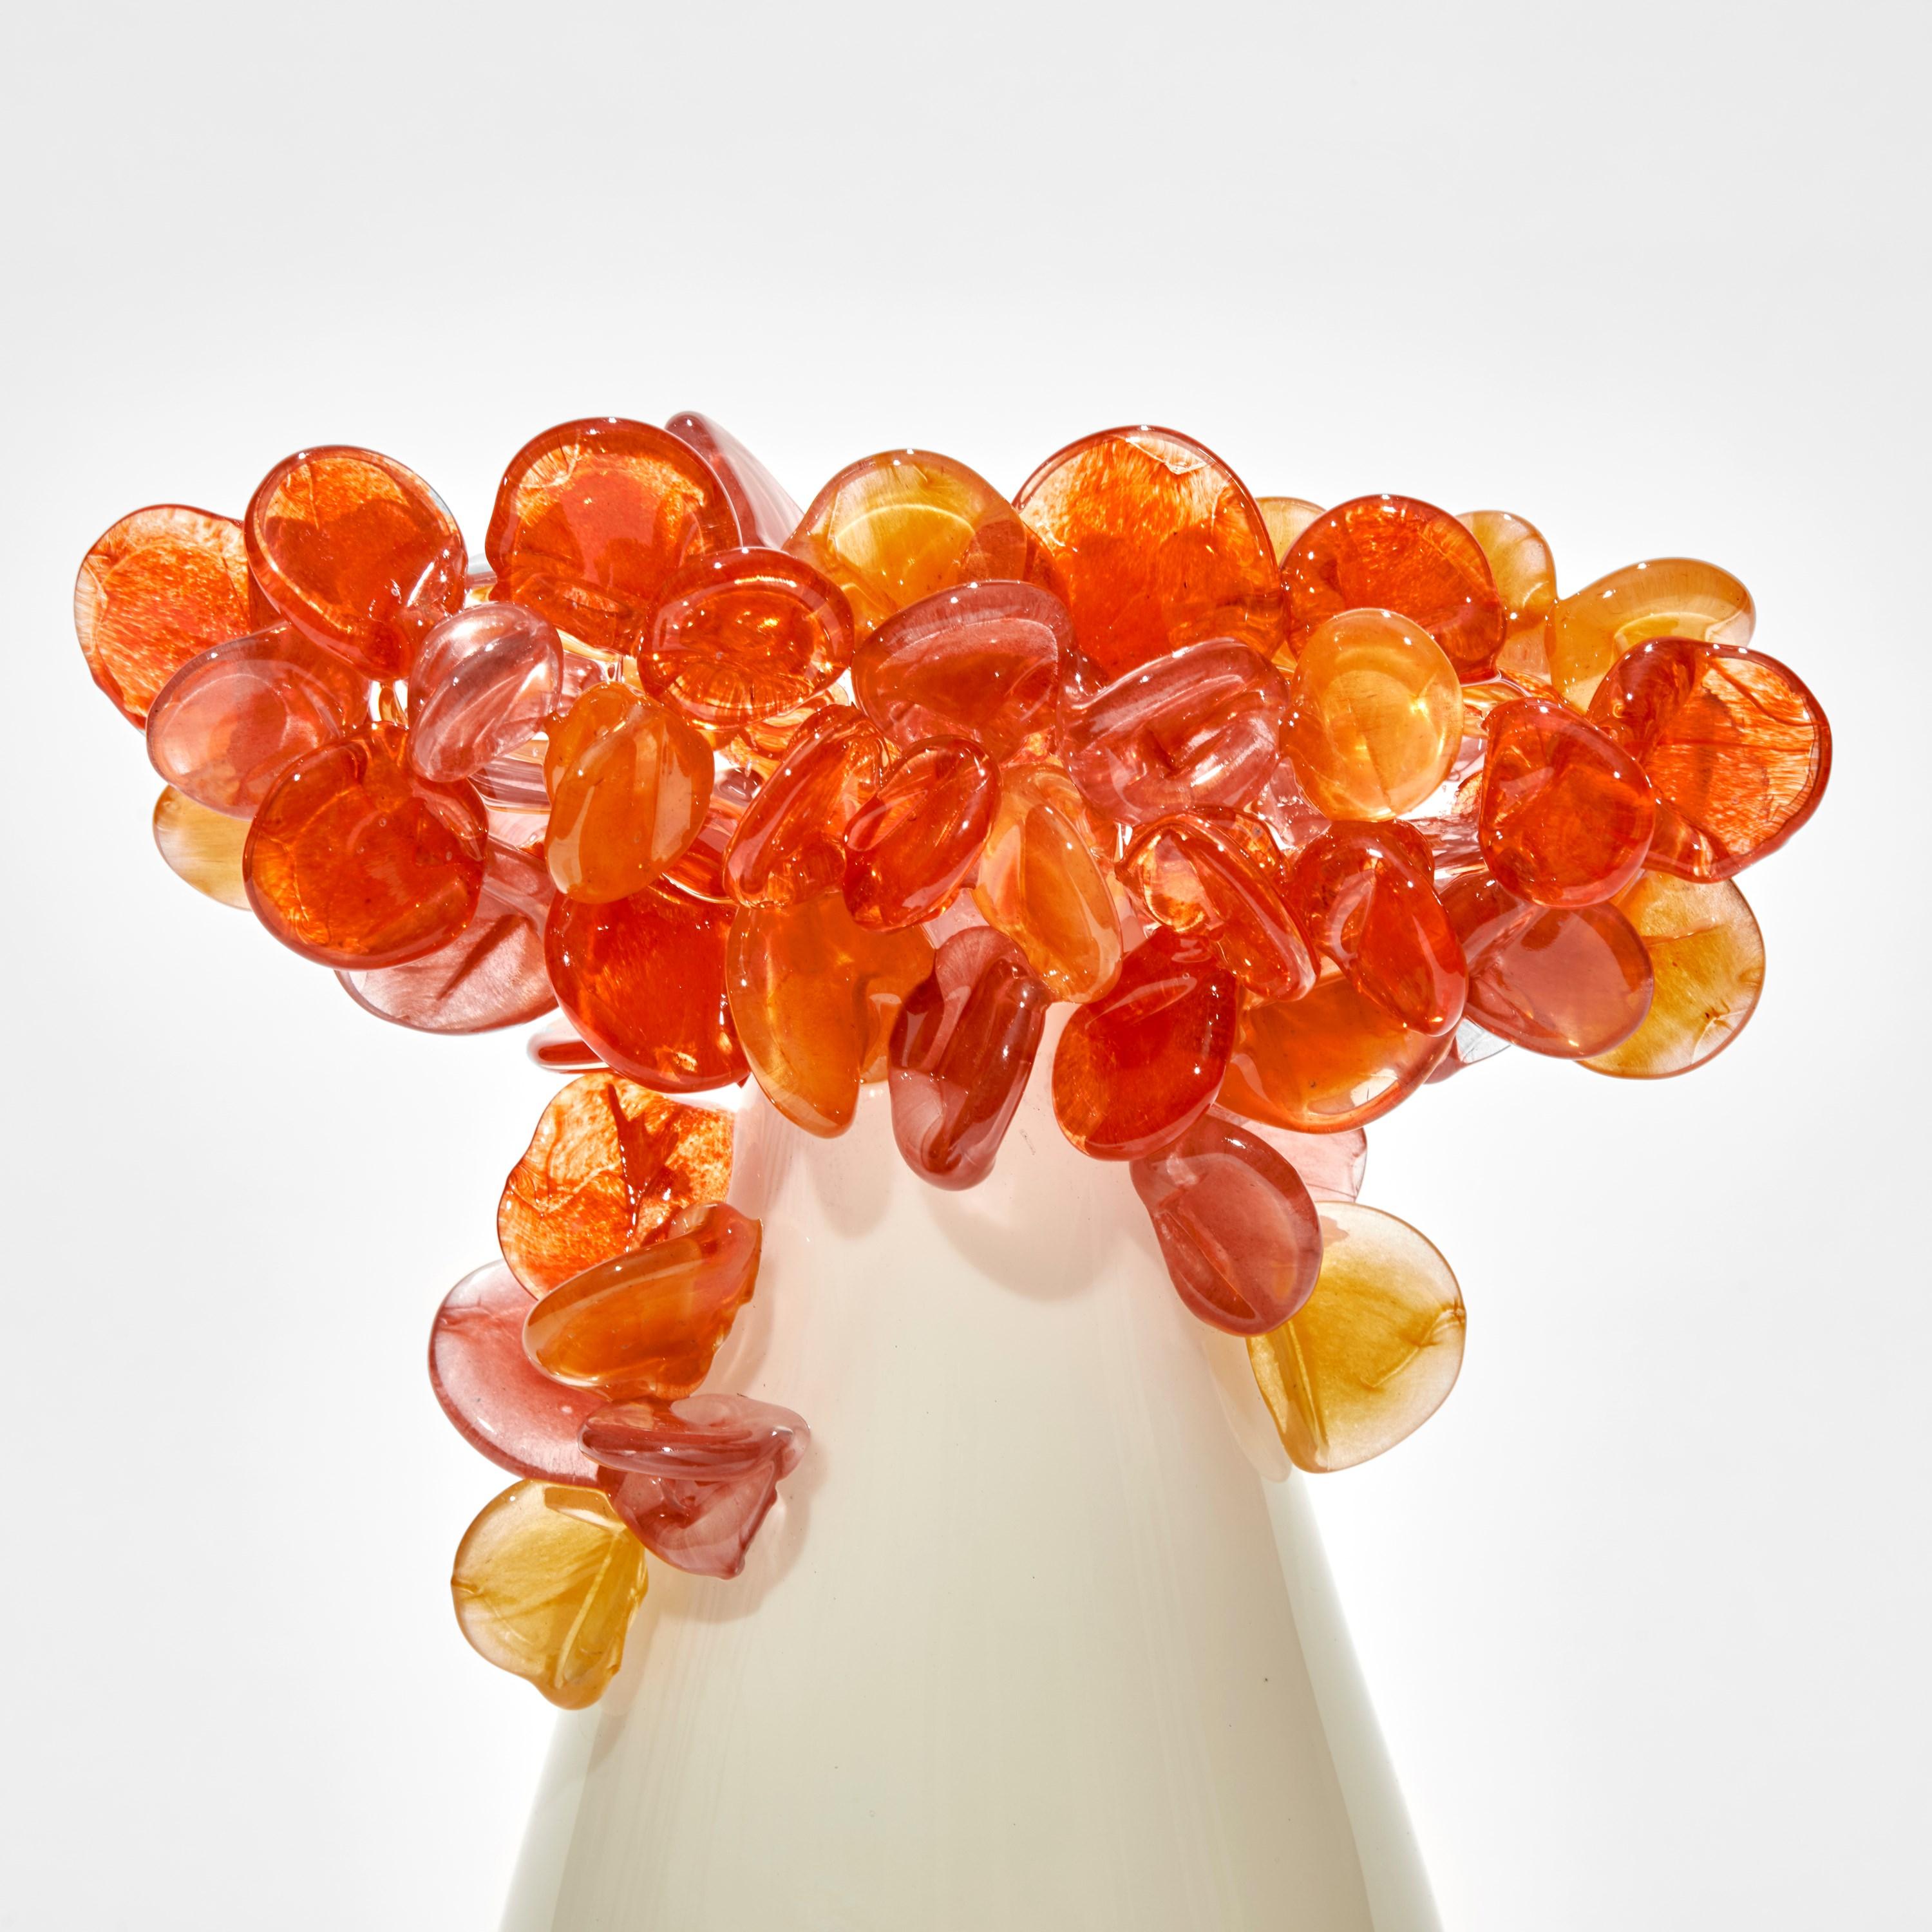 British  Enchanted Dawn in Oranges II, a Unique Glass Tree Sculpture by Louis Thompsom